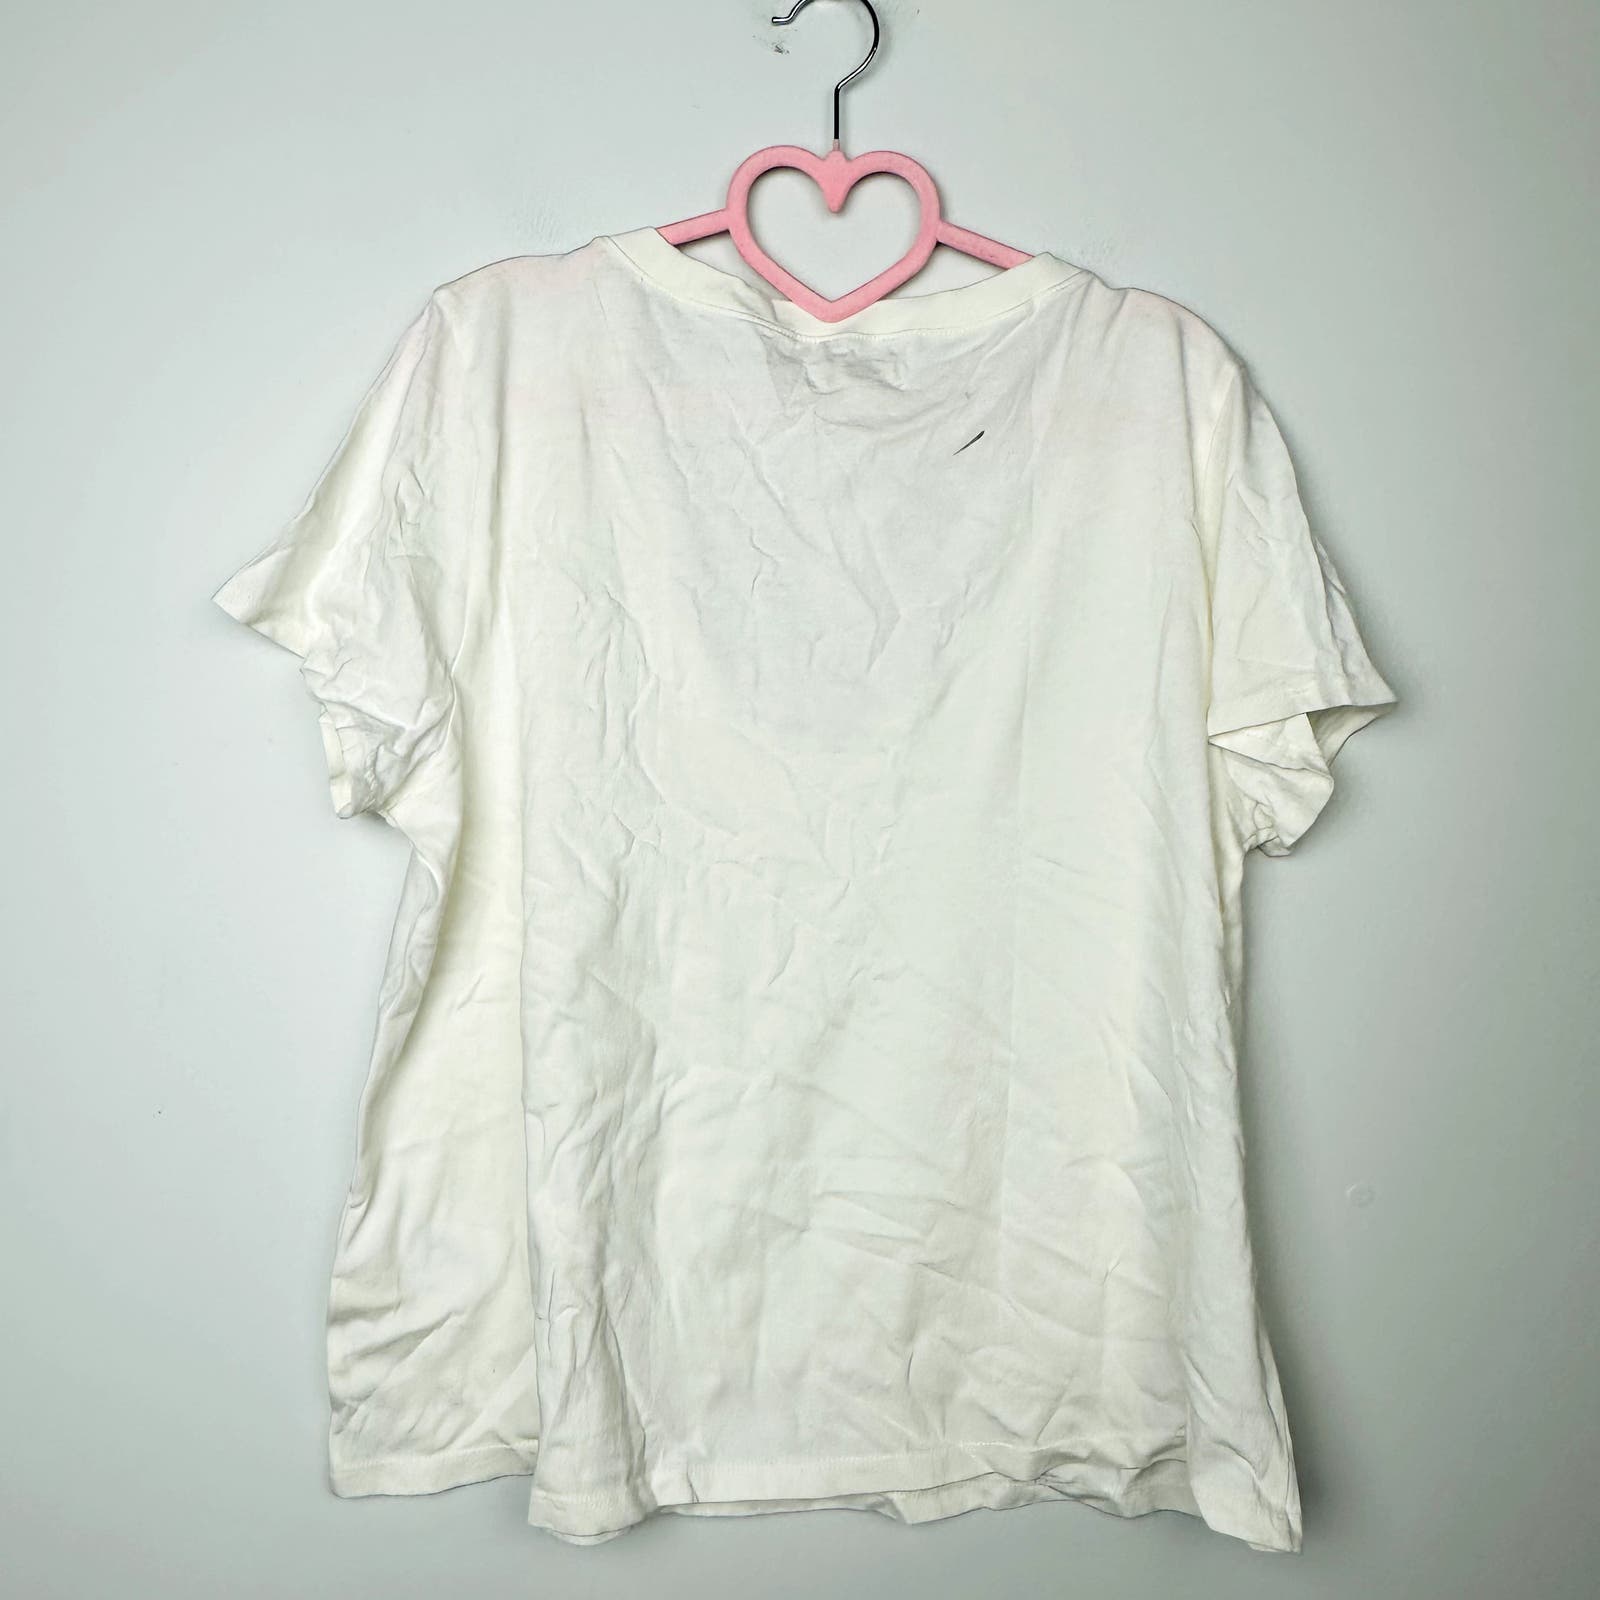 Madewell NWT Lighthouse Softfade Cotton V-Neck Crop Tee Size Large